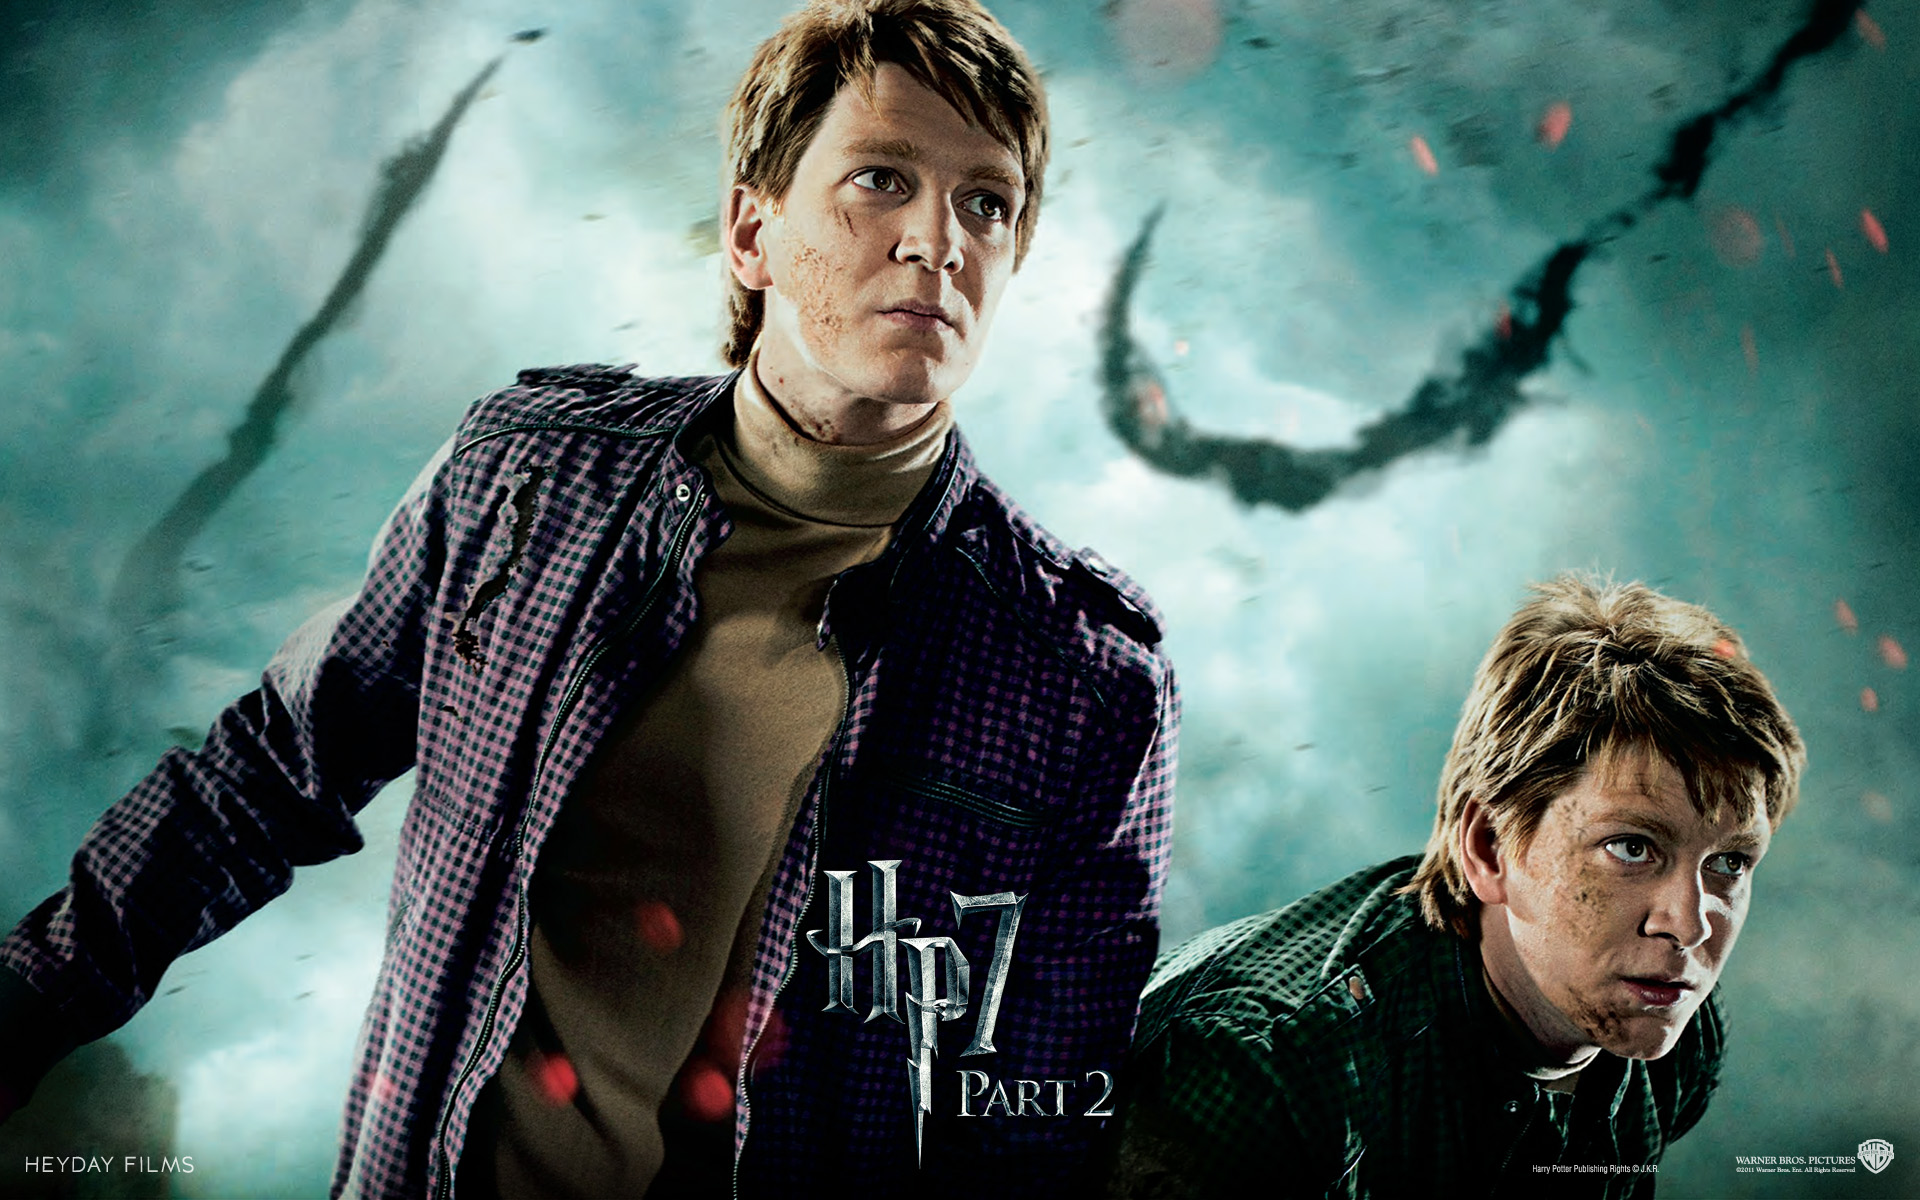 Wallpaper HP7 Weasley Twins - James and Oliver Phelps Harry Potter